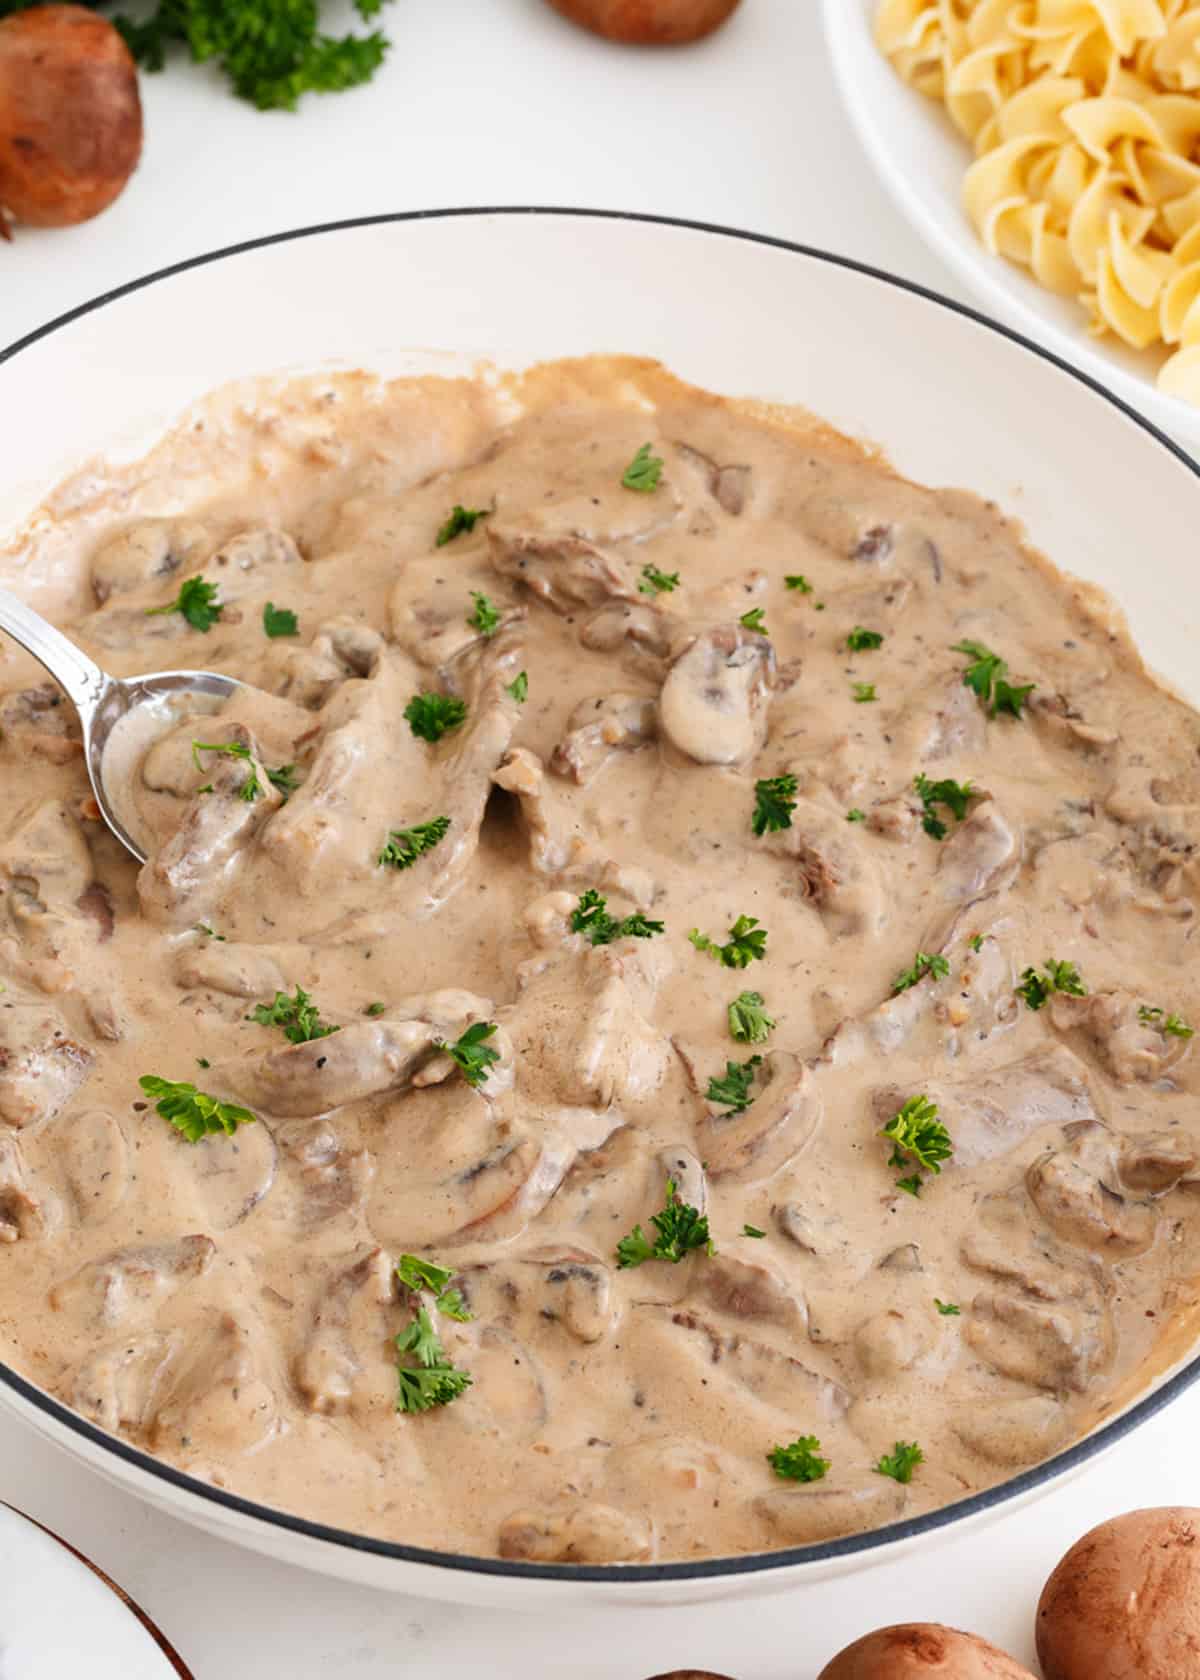 Beef stroganoff cooking in a white pot.